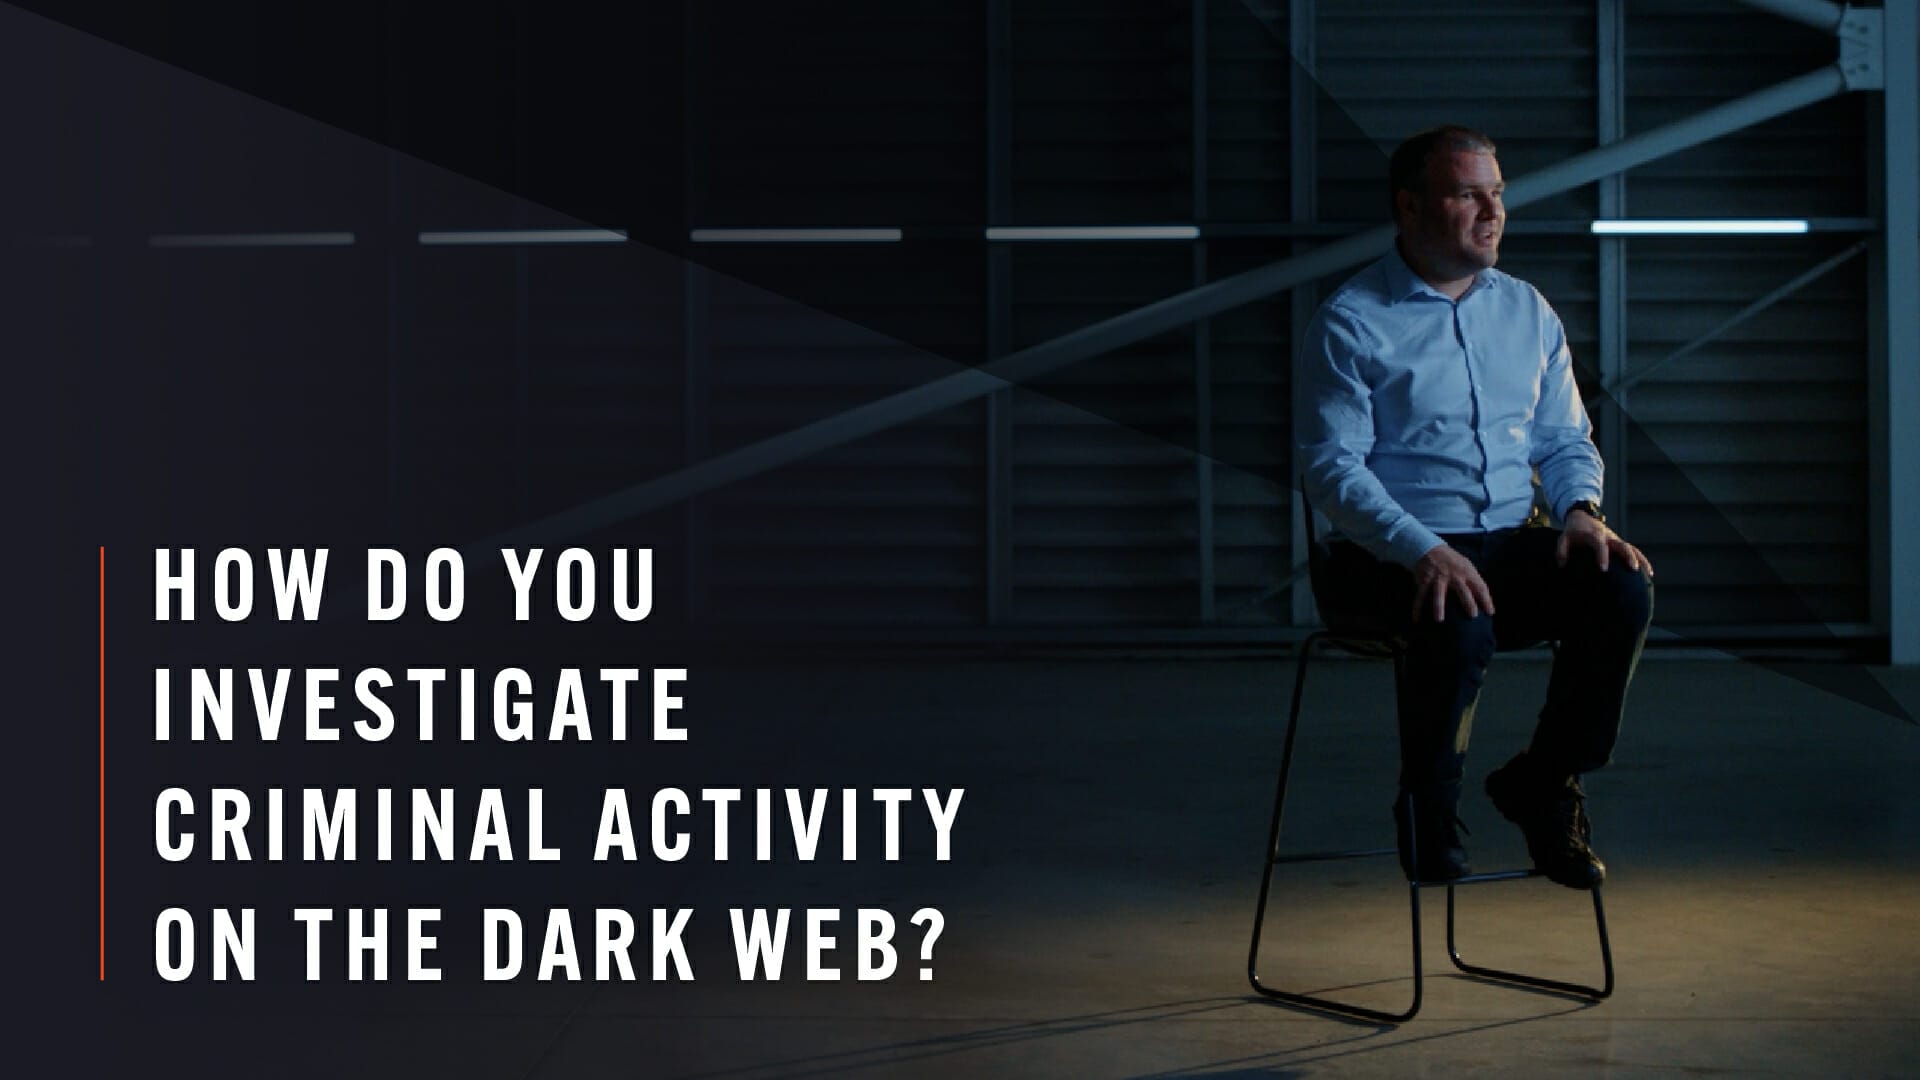 How do you investigate criminal activity on the dark web?